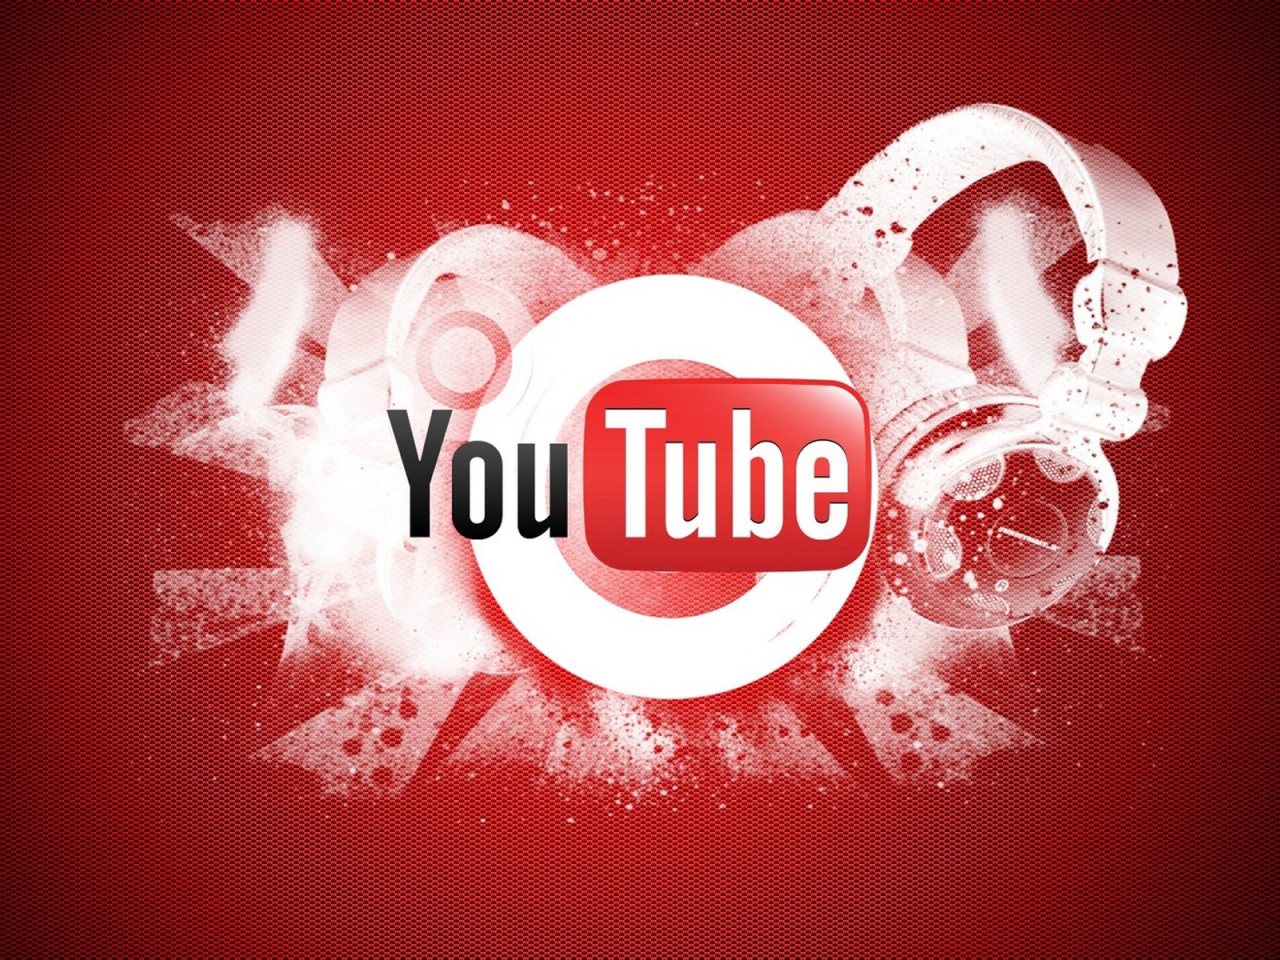 YouTube Logo for 1280 x 960 resolution